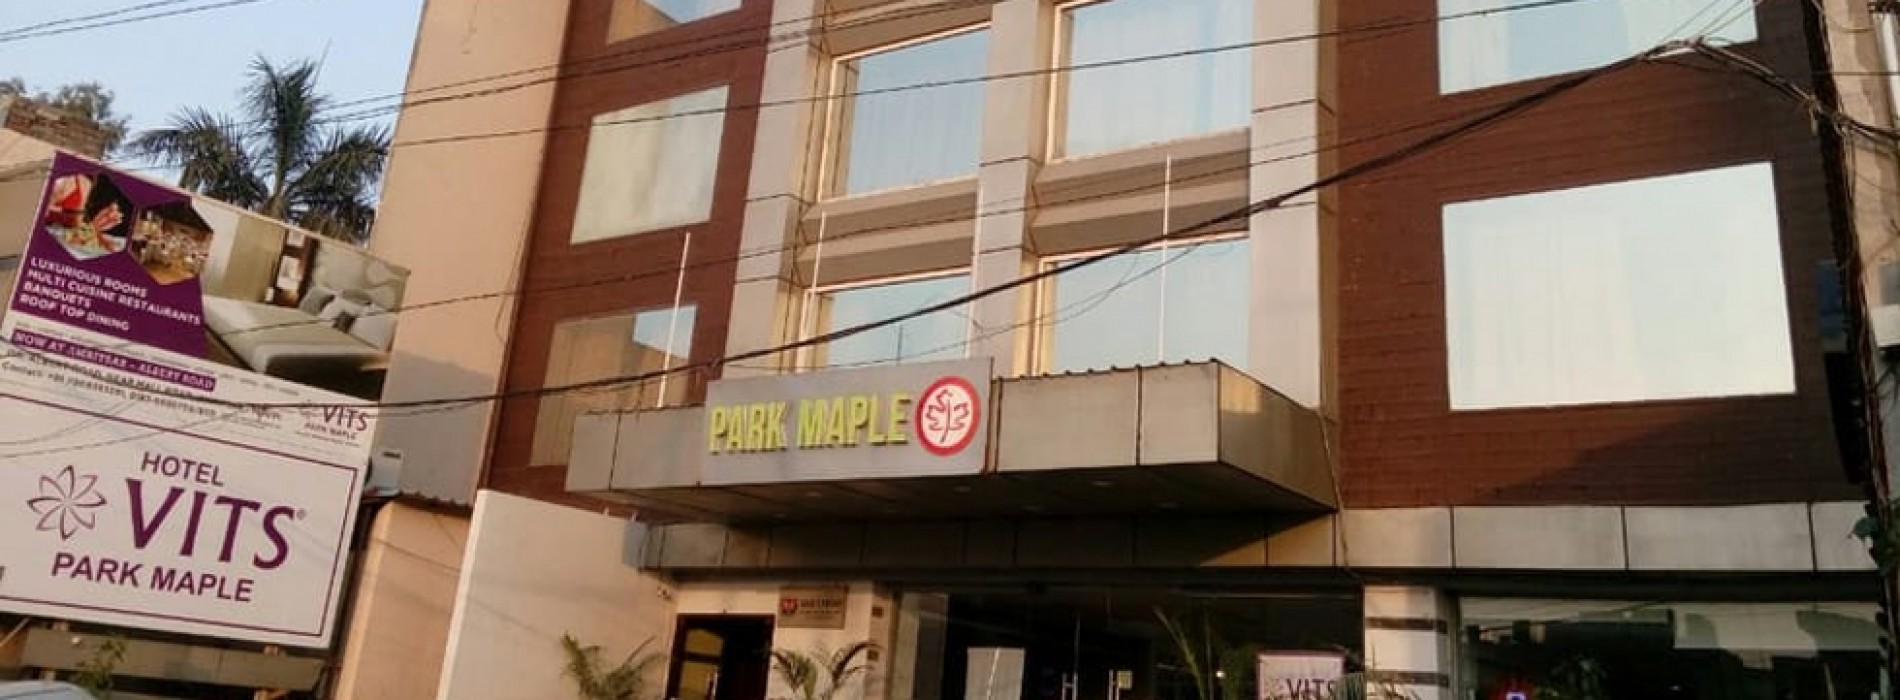 VITS hotels debuts in Amritsar with launch of ‘VITS Park Maple’